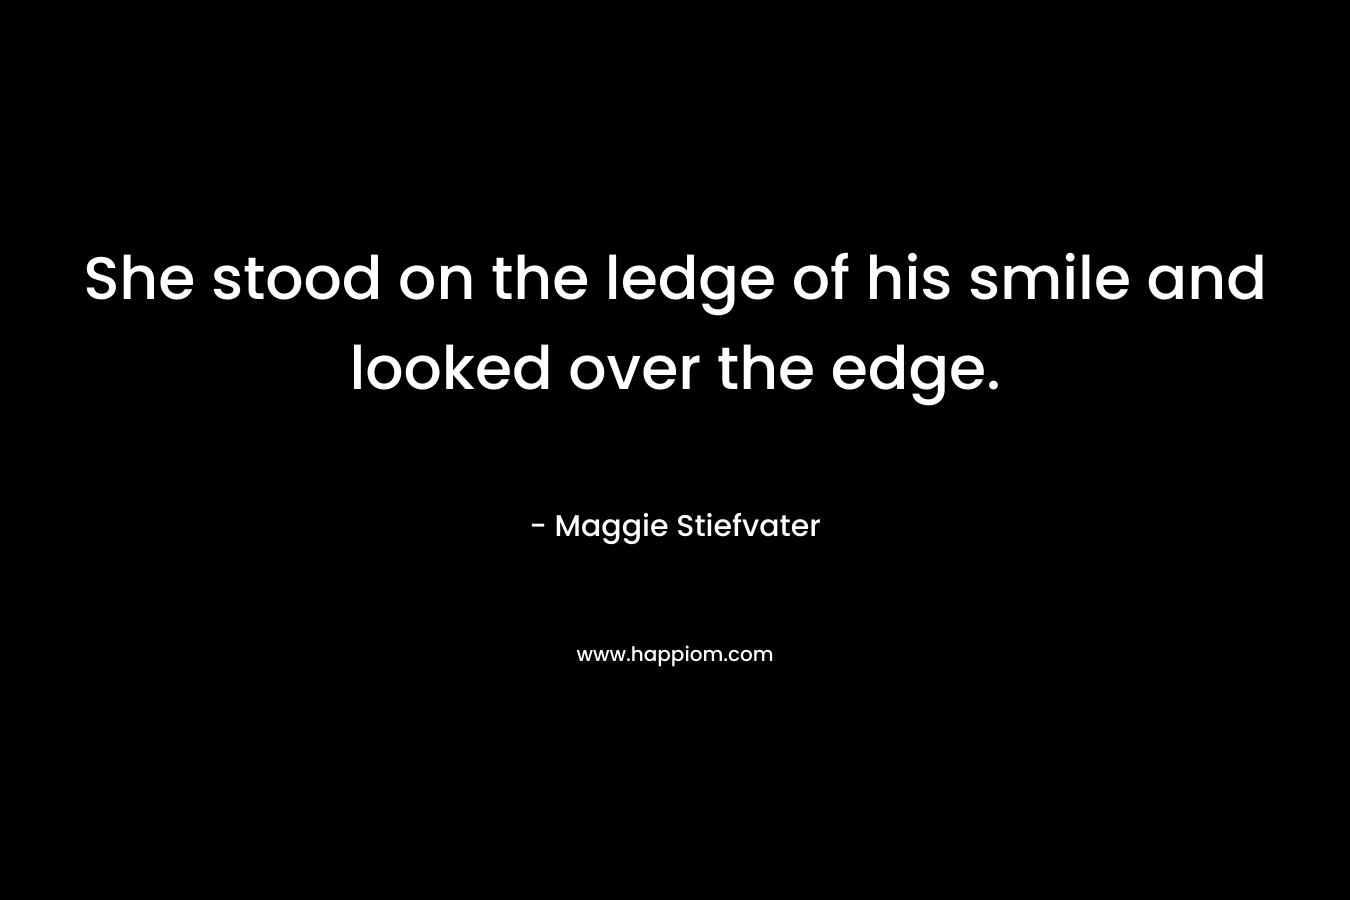 She stood on the ledge of his smile and looked over the edge.